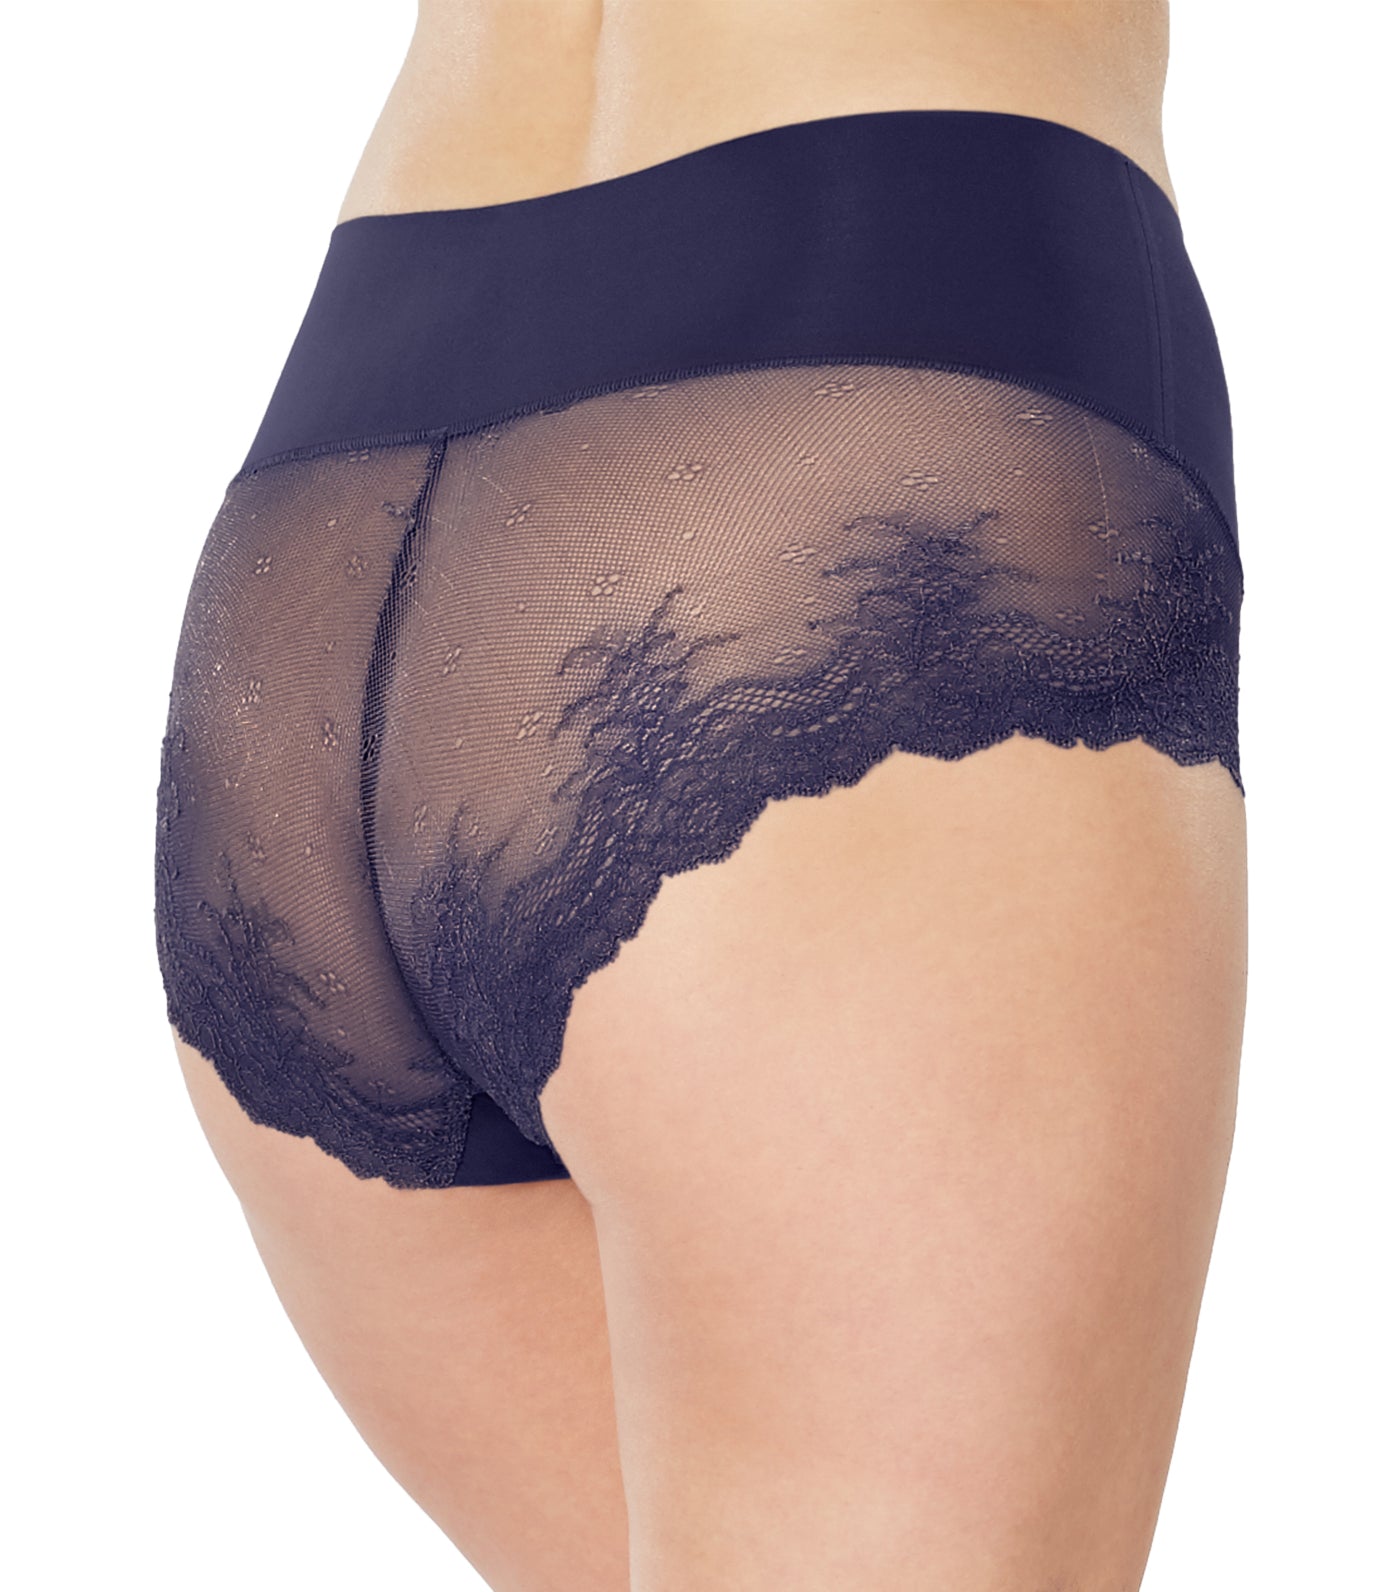 Spanx Undie-tectable Lace Hi-Hipster Panty